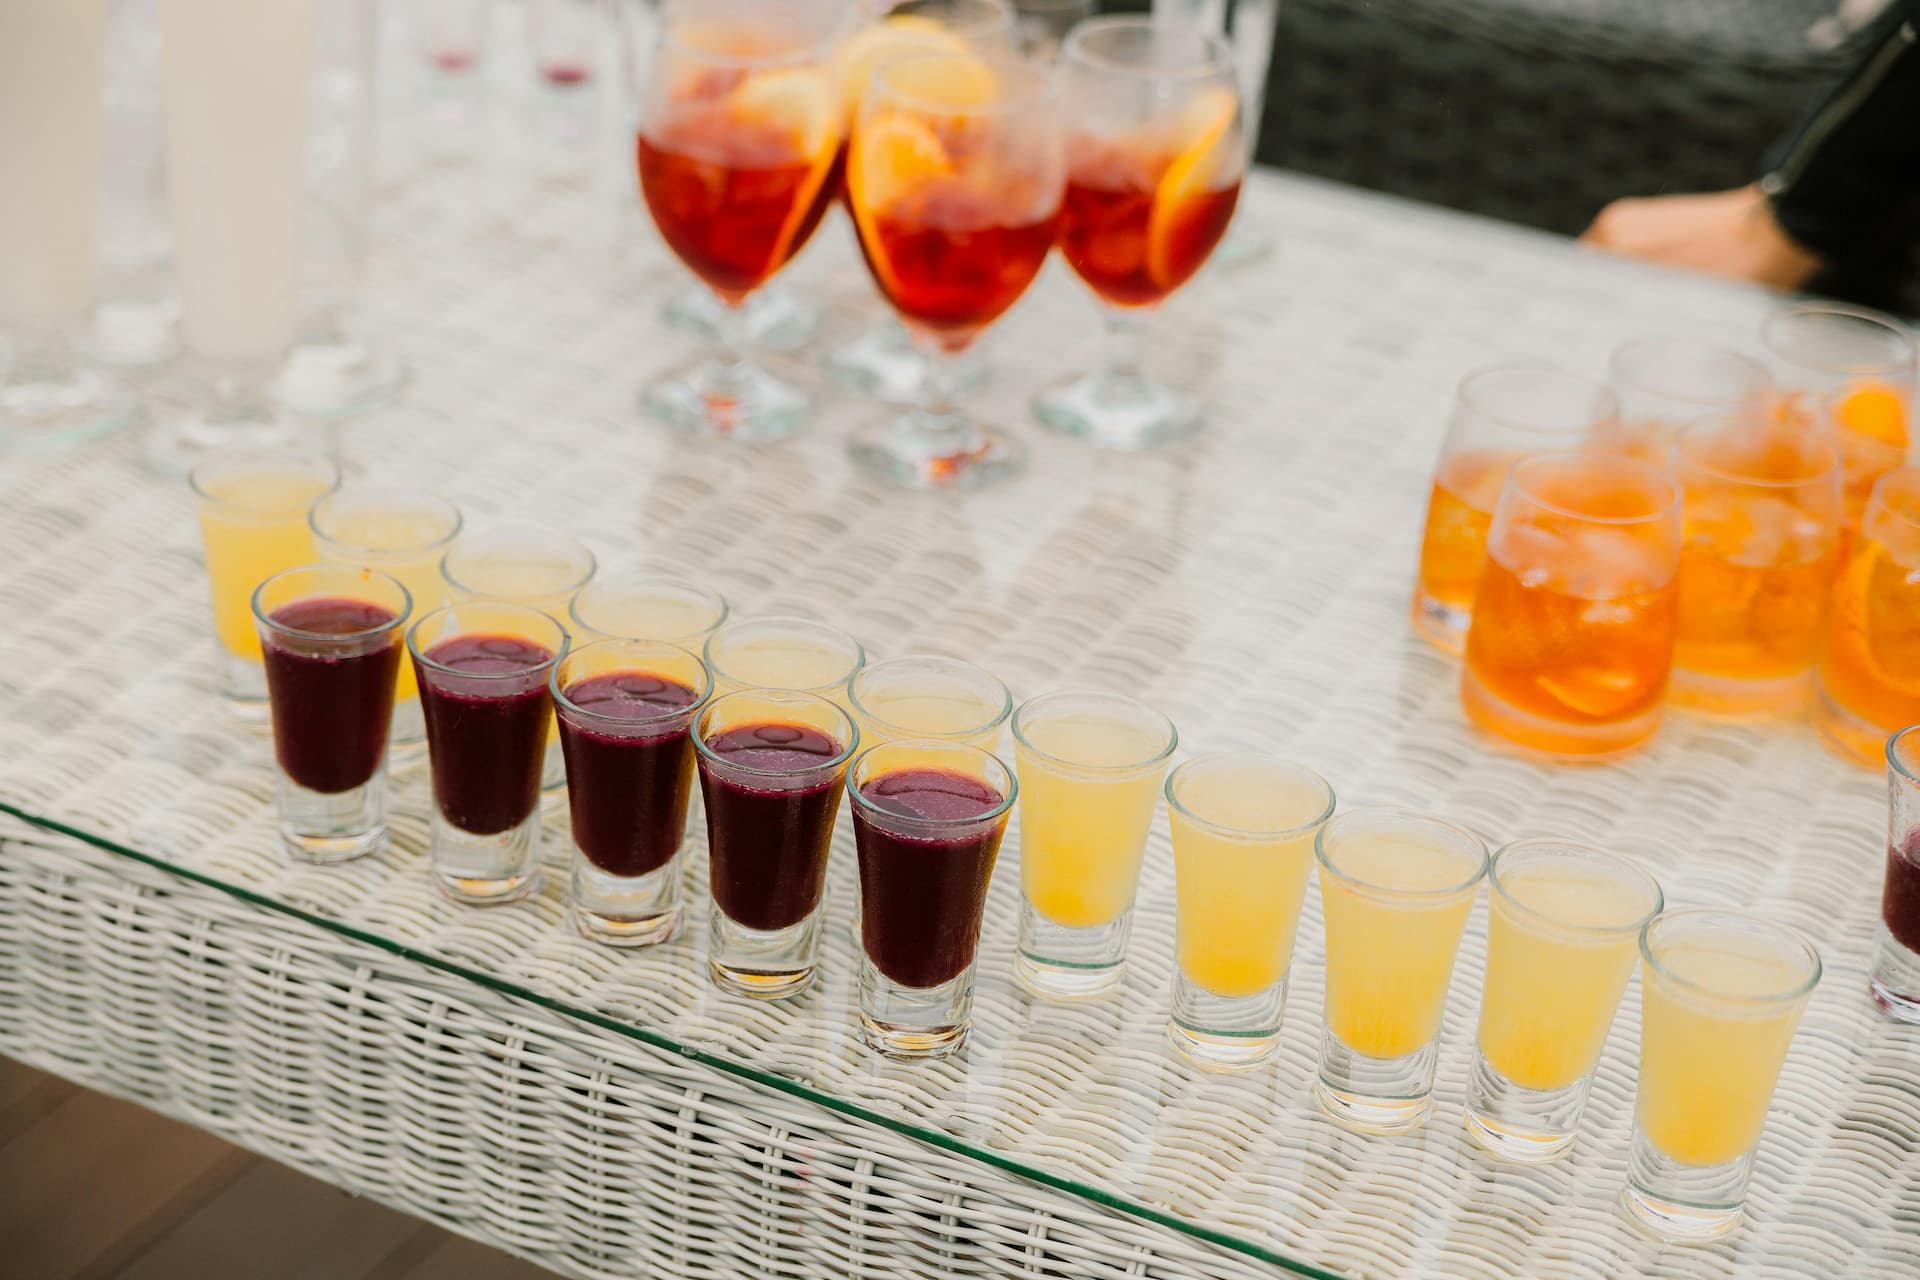 Tender Coconut Liquor Shots To Make Your Guests Go Coco-nuts!